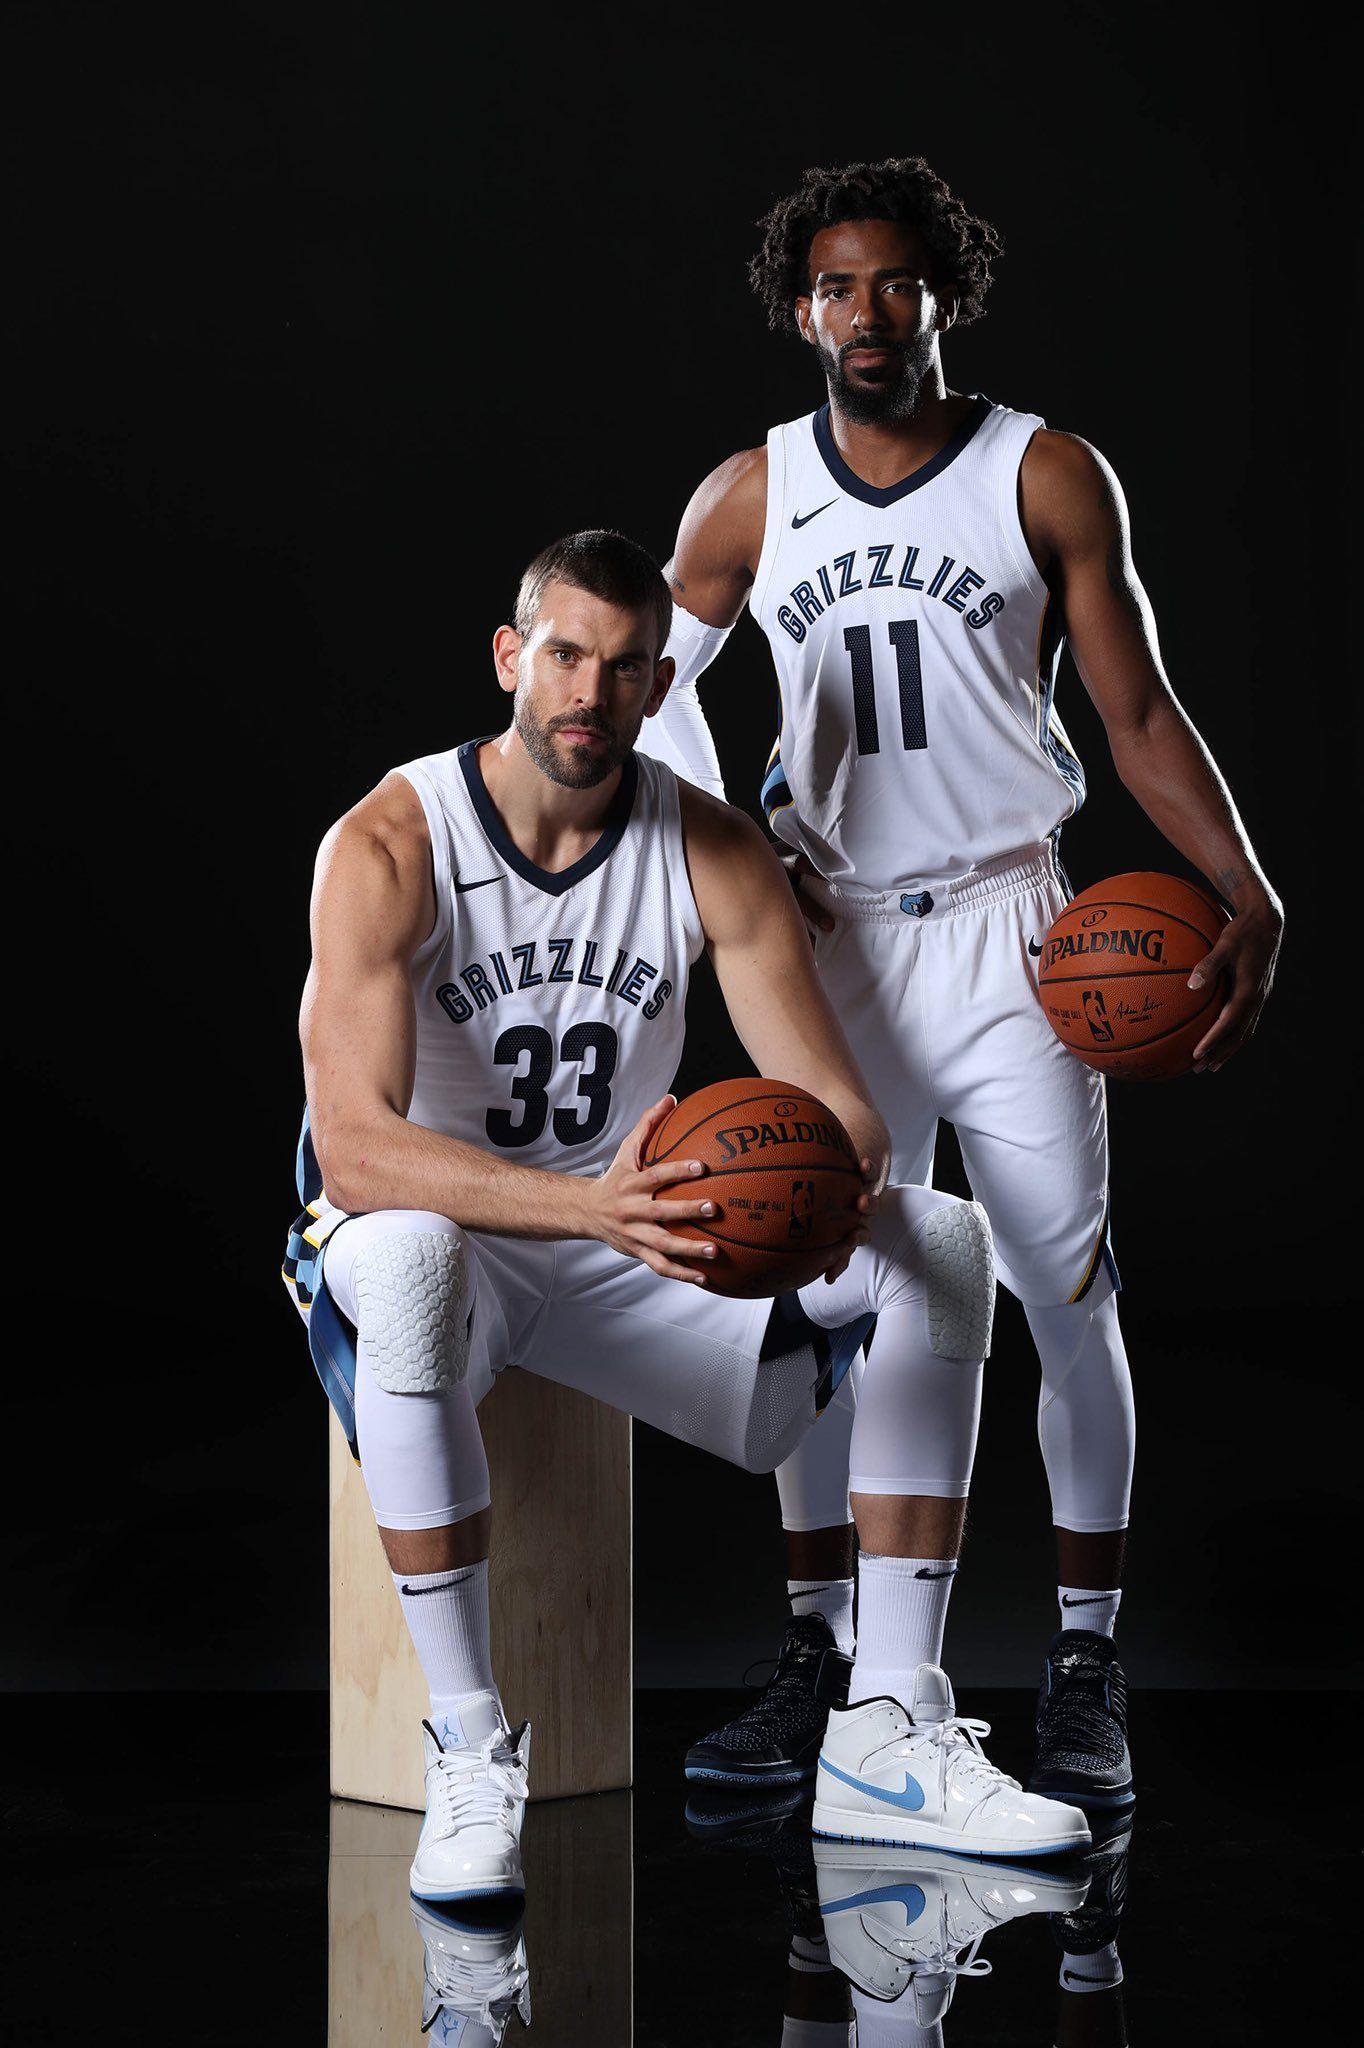 Are y'all ready? The grind don't stop. Marc Gasol and Mike Conley